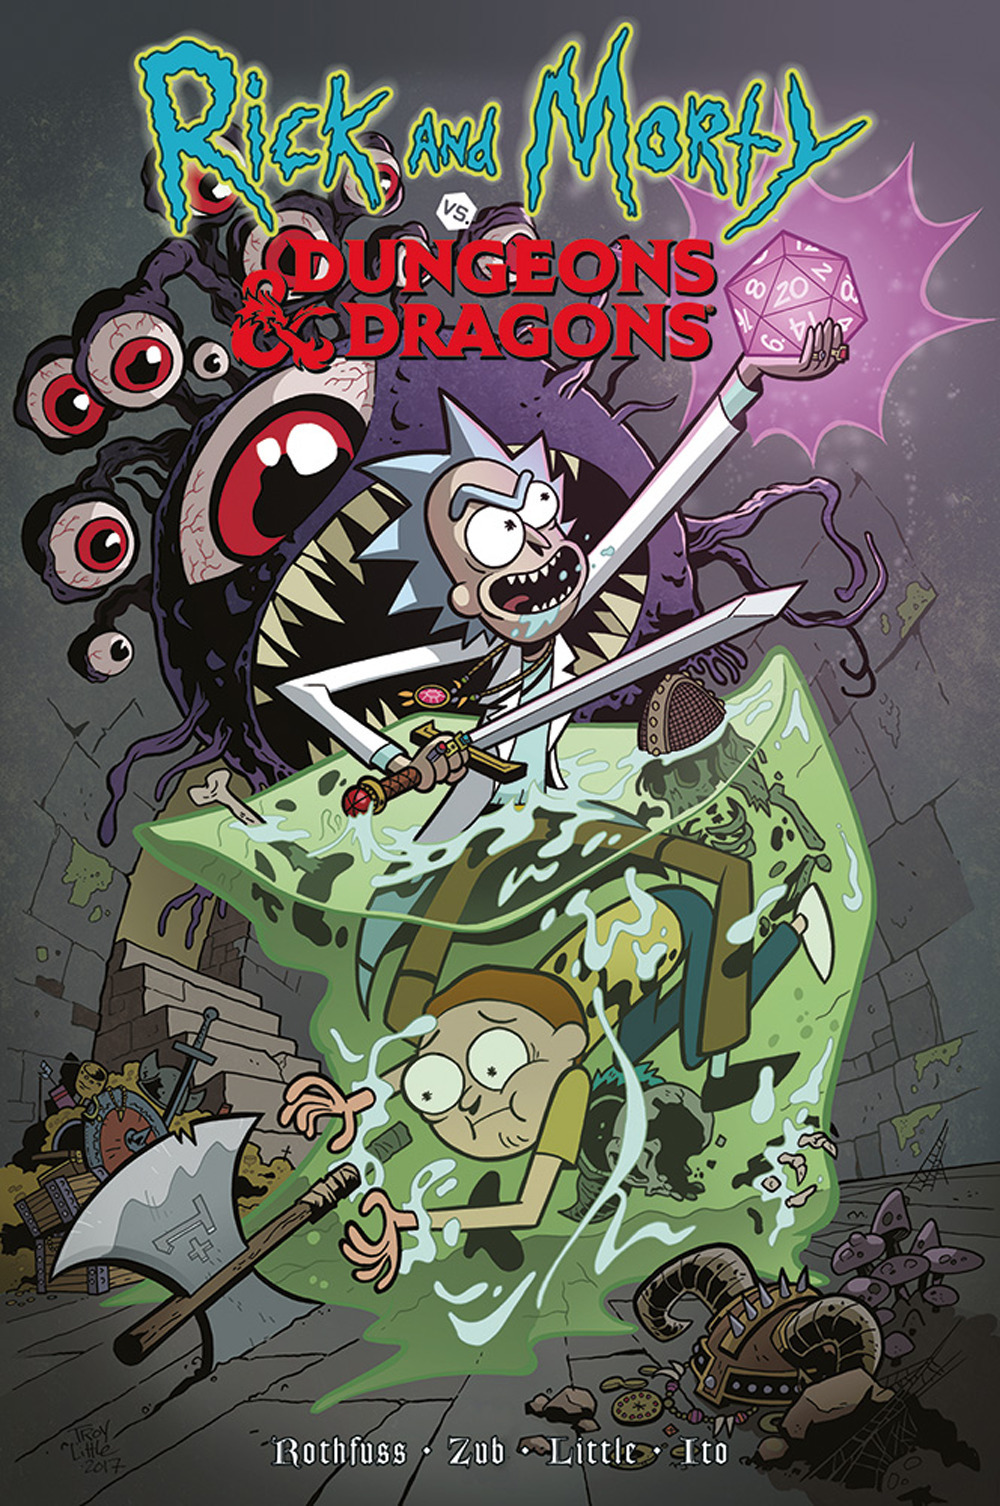 Rick and Morty vs. Dungeons & dragons